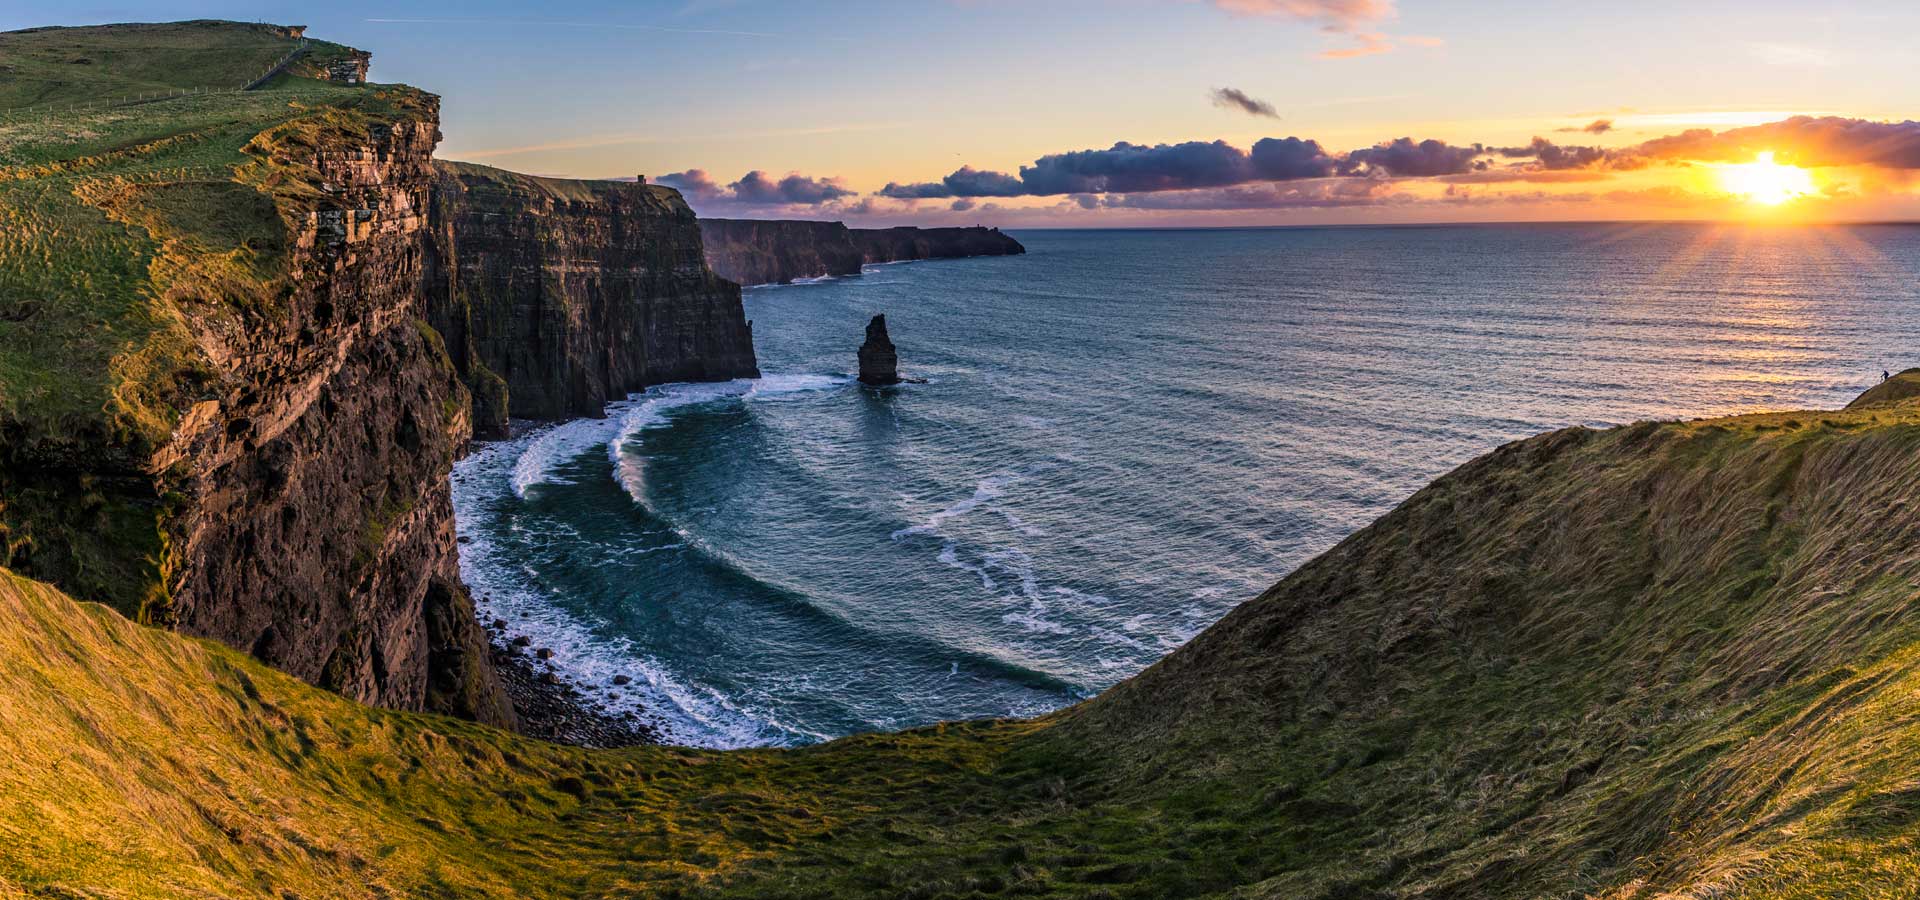 Sunset at the Cliffs of Moher, reconnect, adventure, romantic